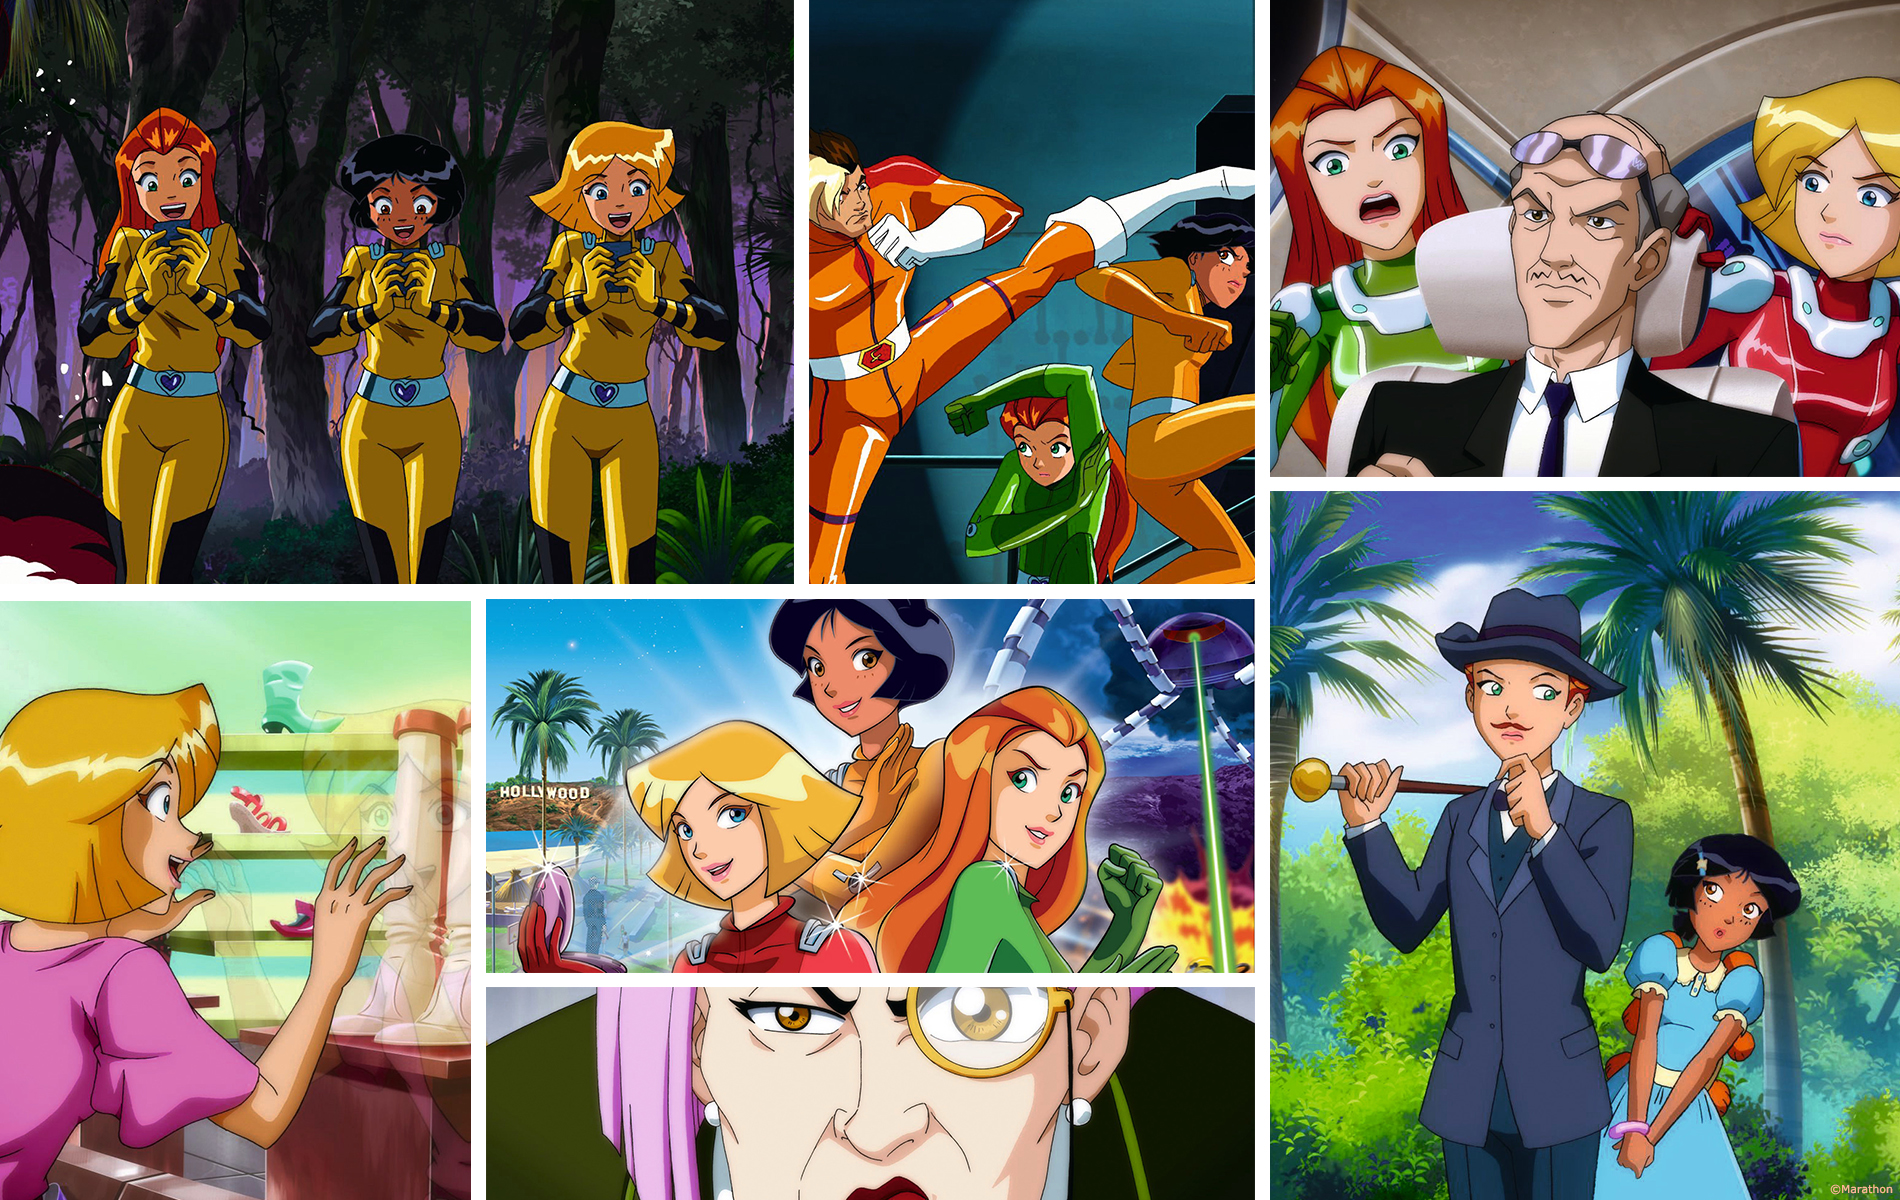 Totally Spies le film - Long métrage - Compositing studio animation 2 minutes